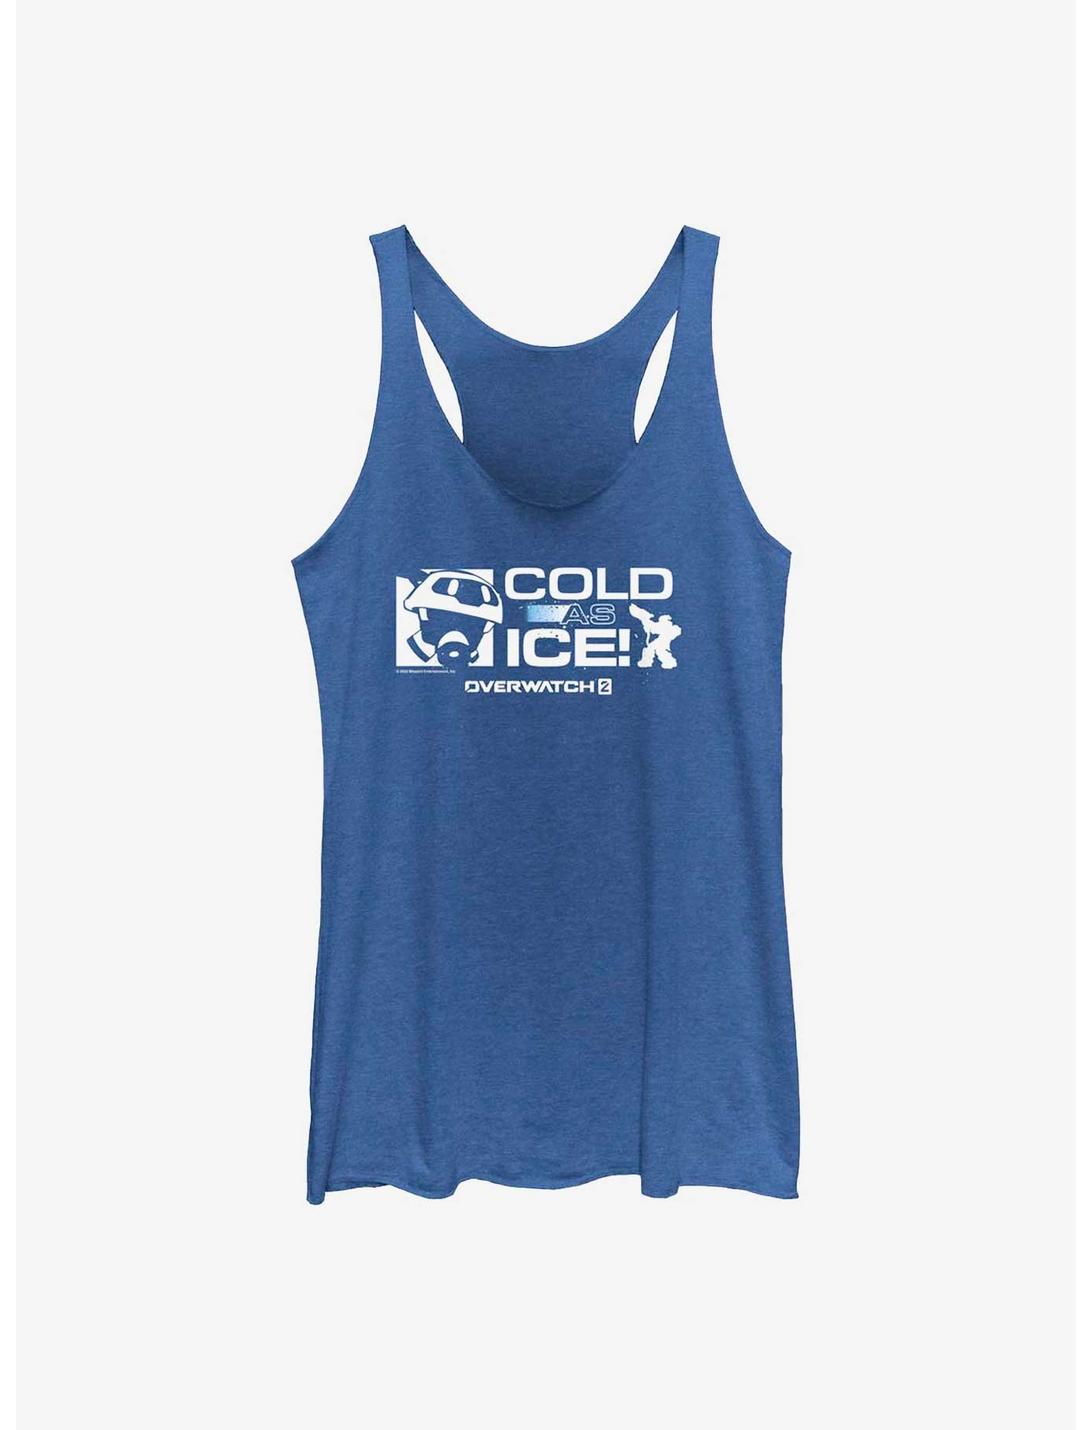 Overwatch 2 Cold As Ice Womens Tank Top, ROY HTR, hi-res